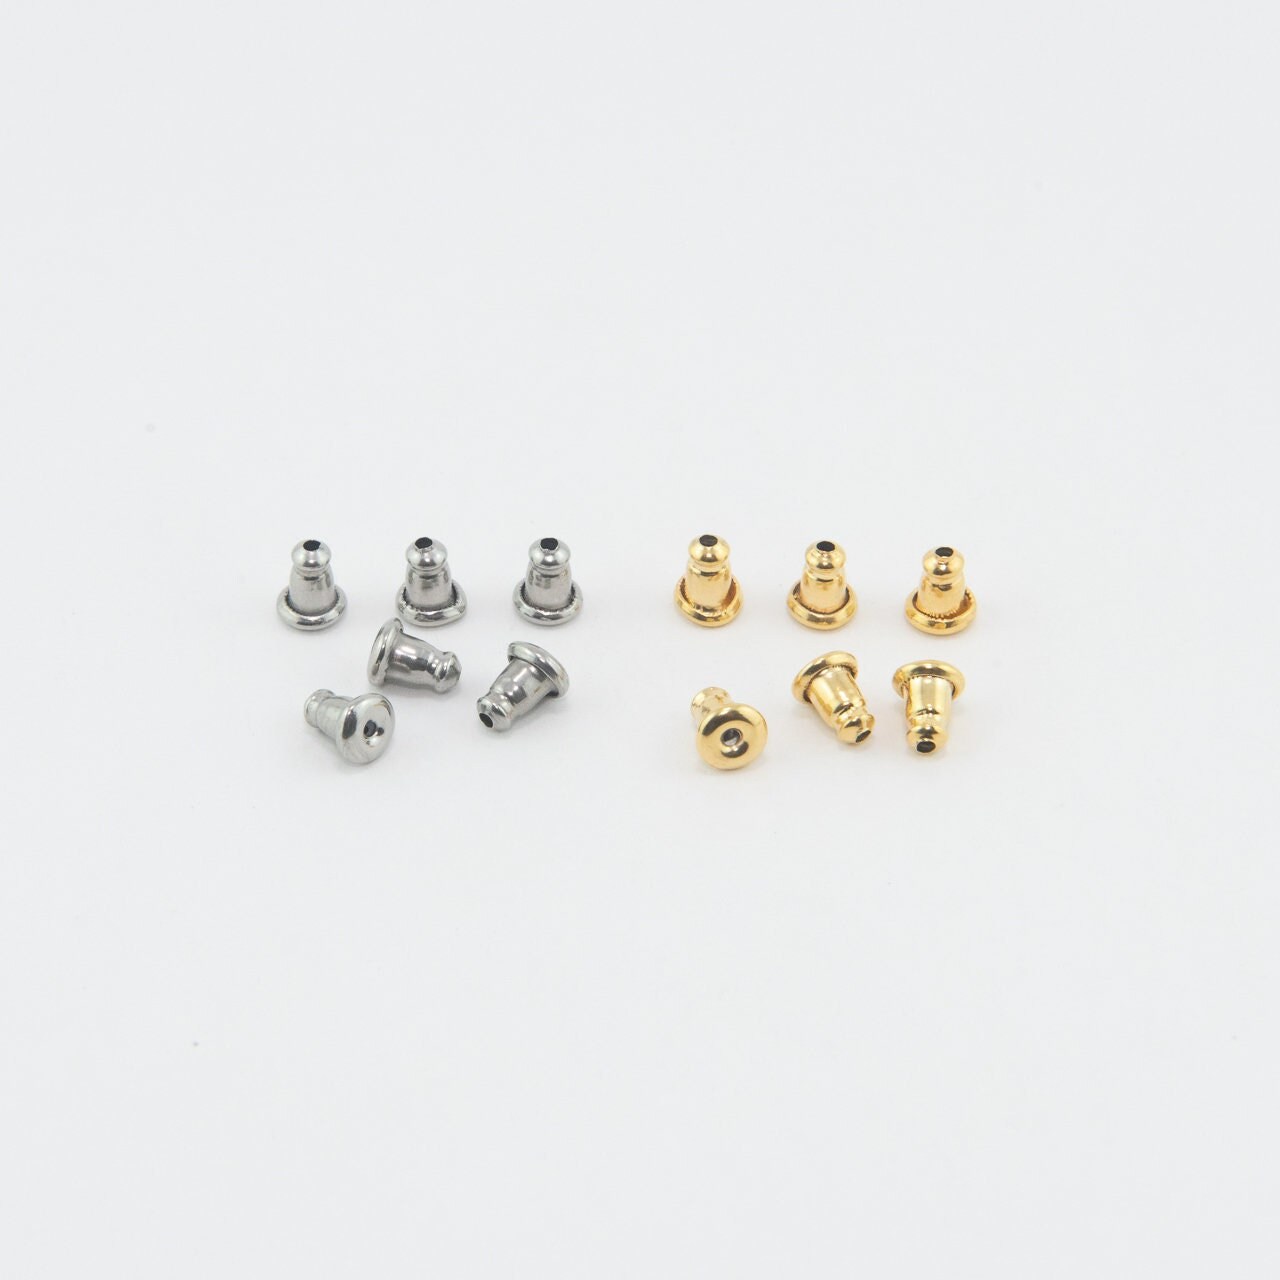 450PCS Gold Earring Posts and Backs,Hypoallergenic Earring Studs for  Jewelry Making,Stainless Steel Flat Pad with Butterfly and Rubber Bullet  Earring Backs (4mm, 6mm) 